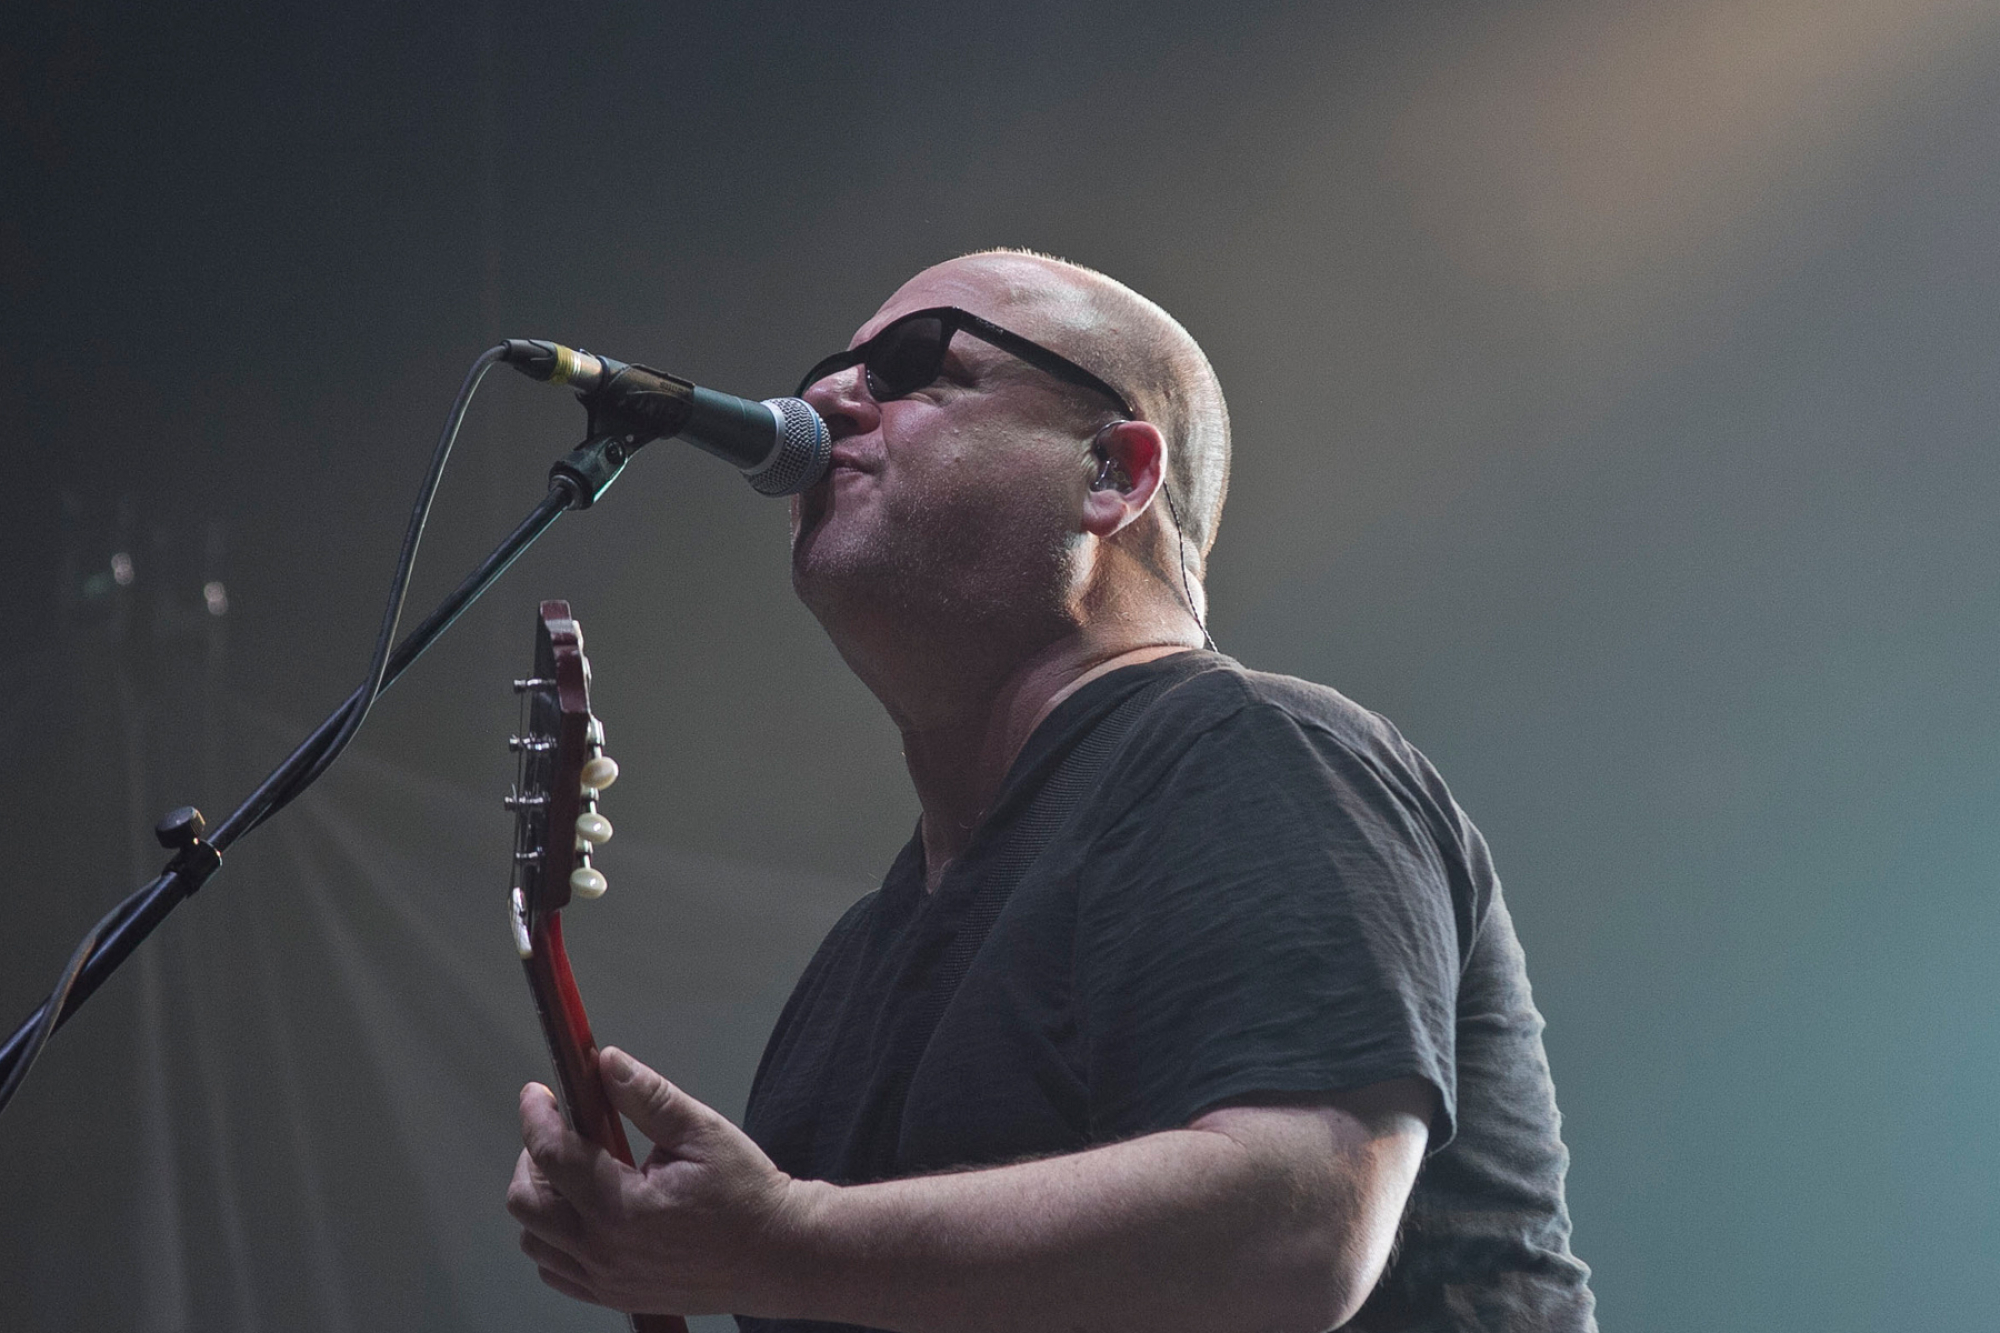 Pixies band, Weezer show, Sold out crowd, Wildly entertaining performance, 2000x1340 HD Desktop